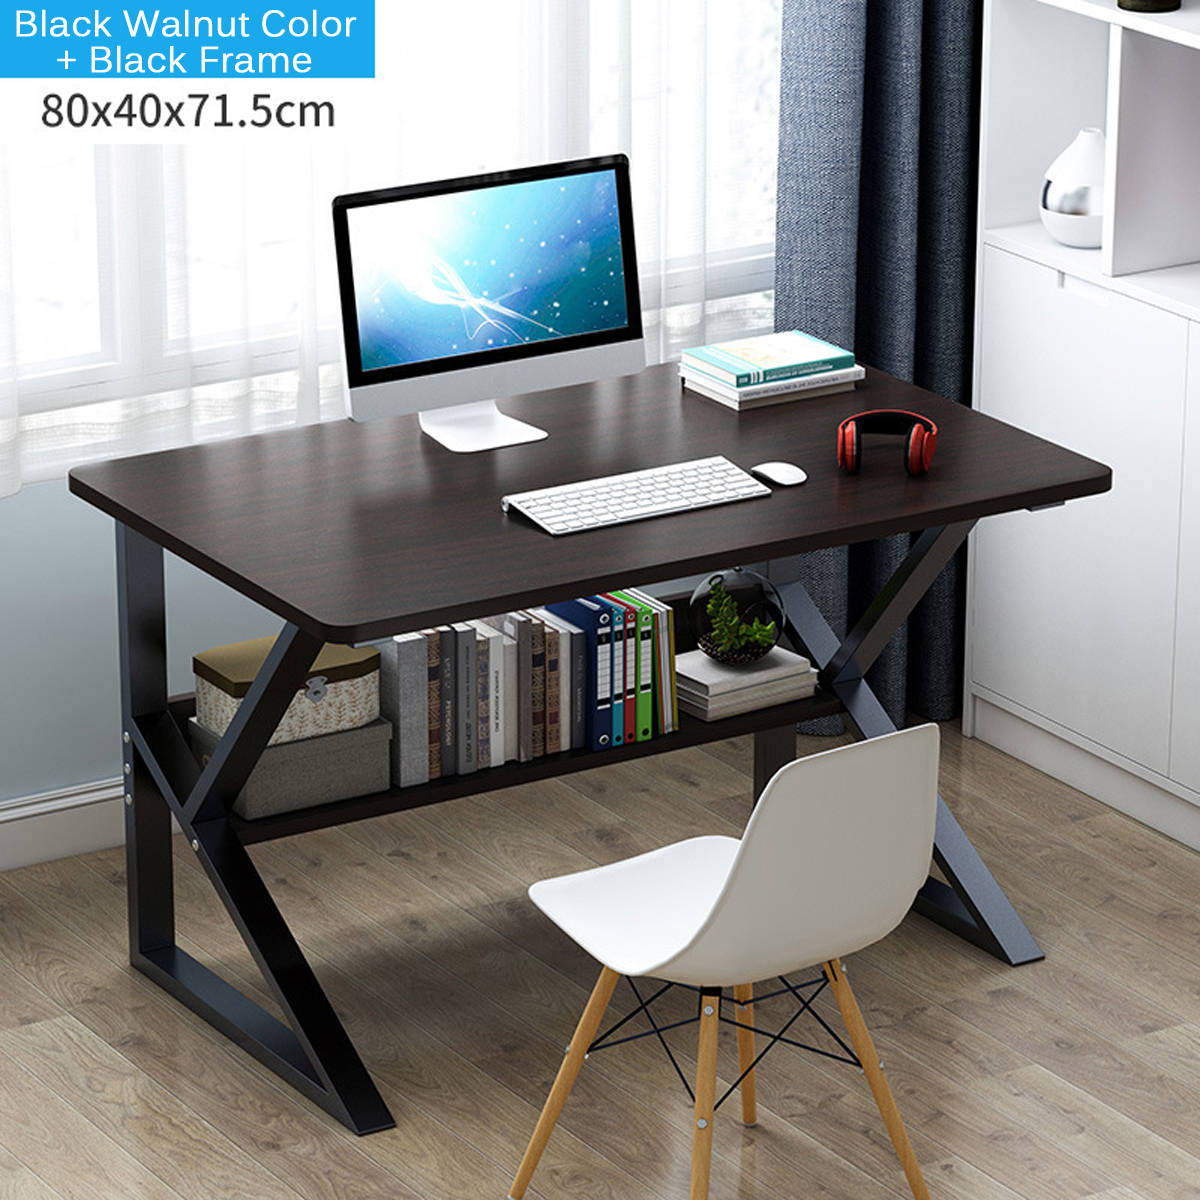 Computer-Desk-Student-Writing-Study-Table-Workstation-Laptop-Desk-Game-Table-with-Storage-Shelf-for--1783020-6